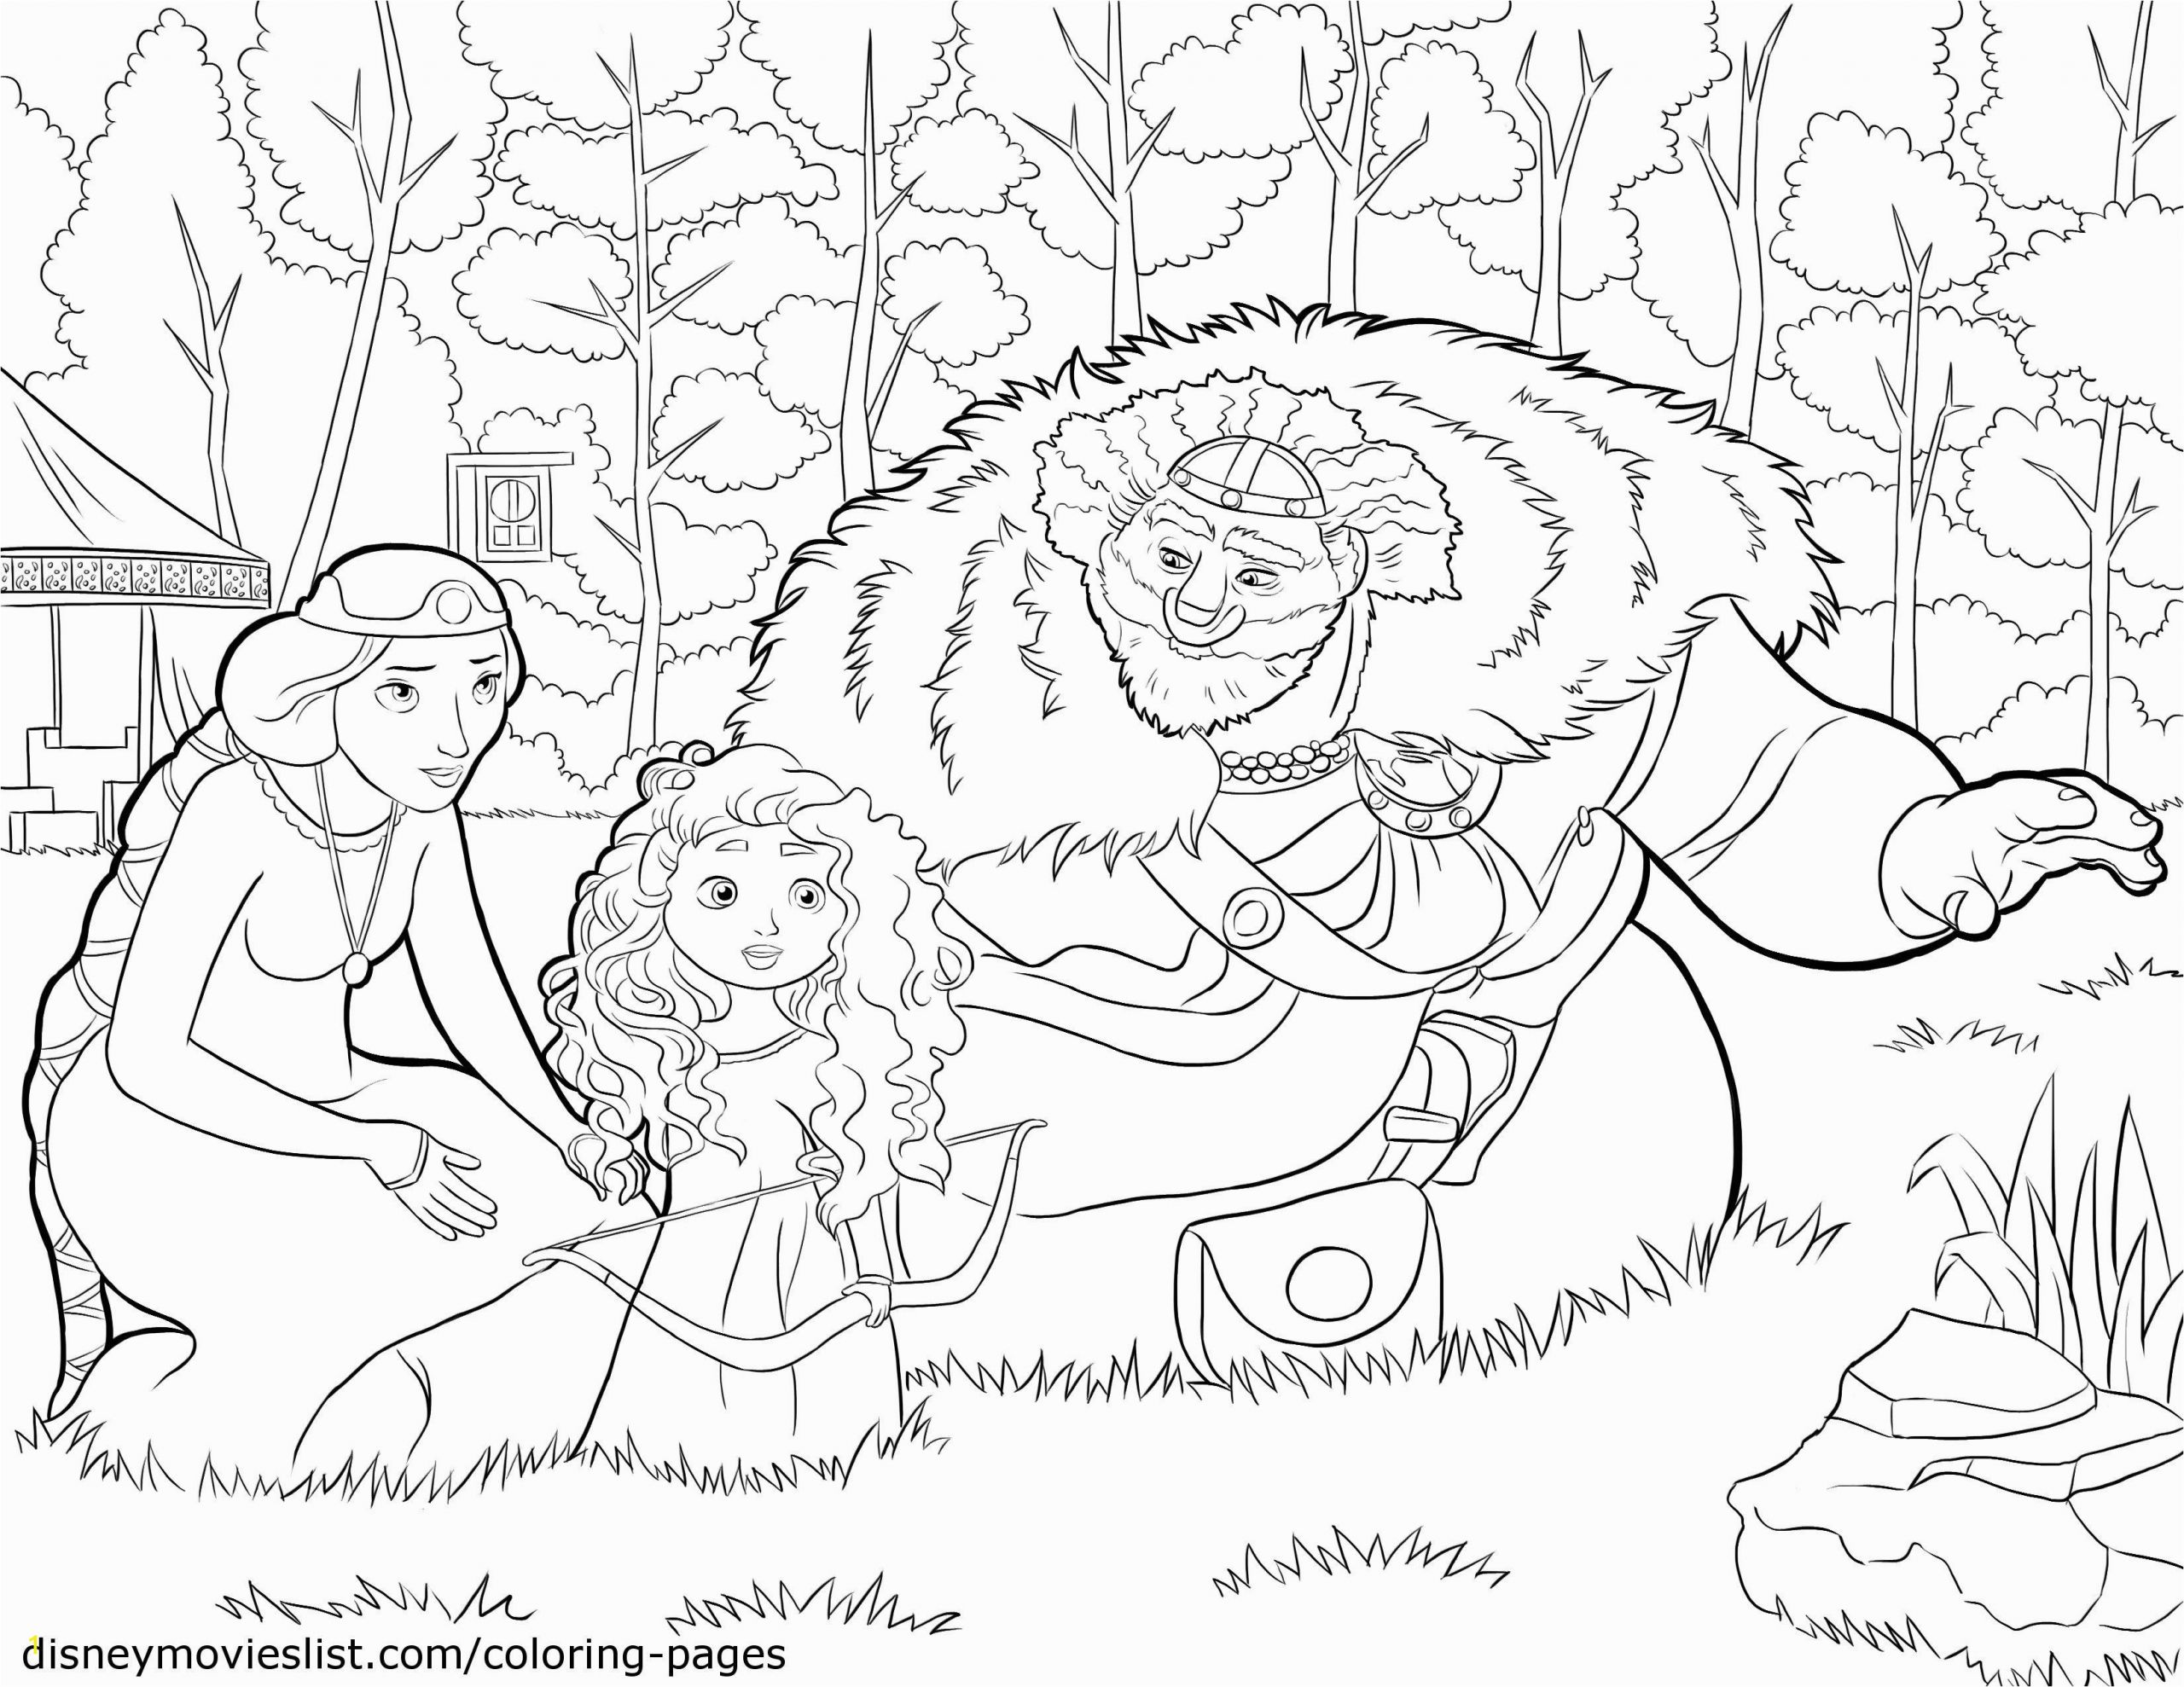 Ryan toys Coloring Pages Pin by Lindee Weaver Ryan On 10embroidery Make